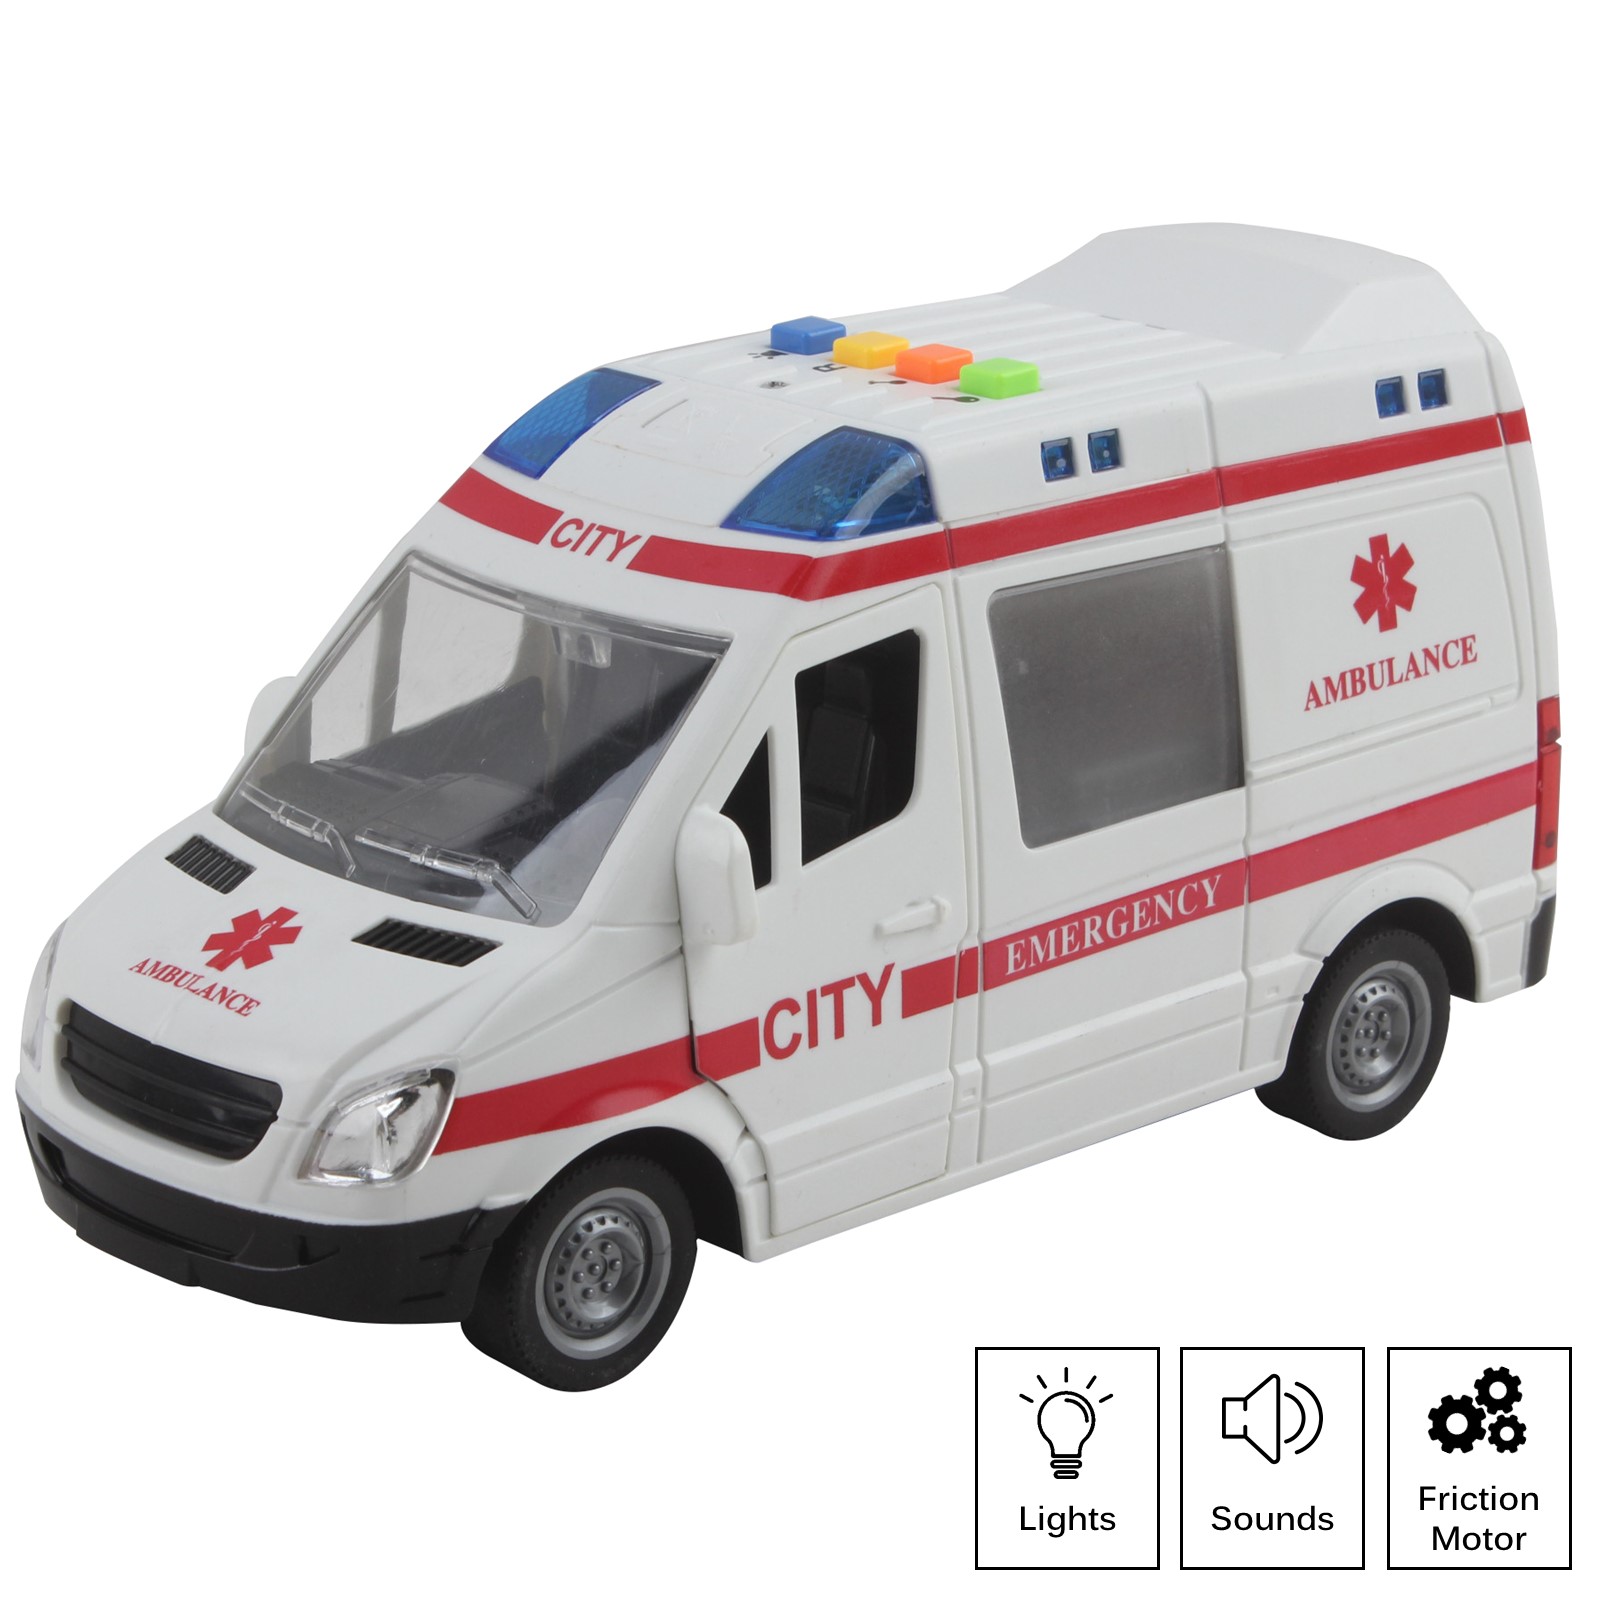 Rescue Ambulance Friction Powered 116 Scale With Lights And Sounds Kids Medical Transport Emergency Vehicle Push And Go Durable Toy Car Pretend Play Van Great Gift For Children Boys Girls TE-91